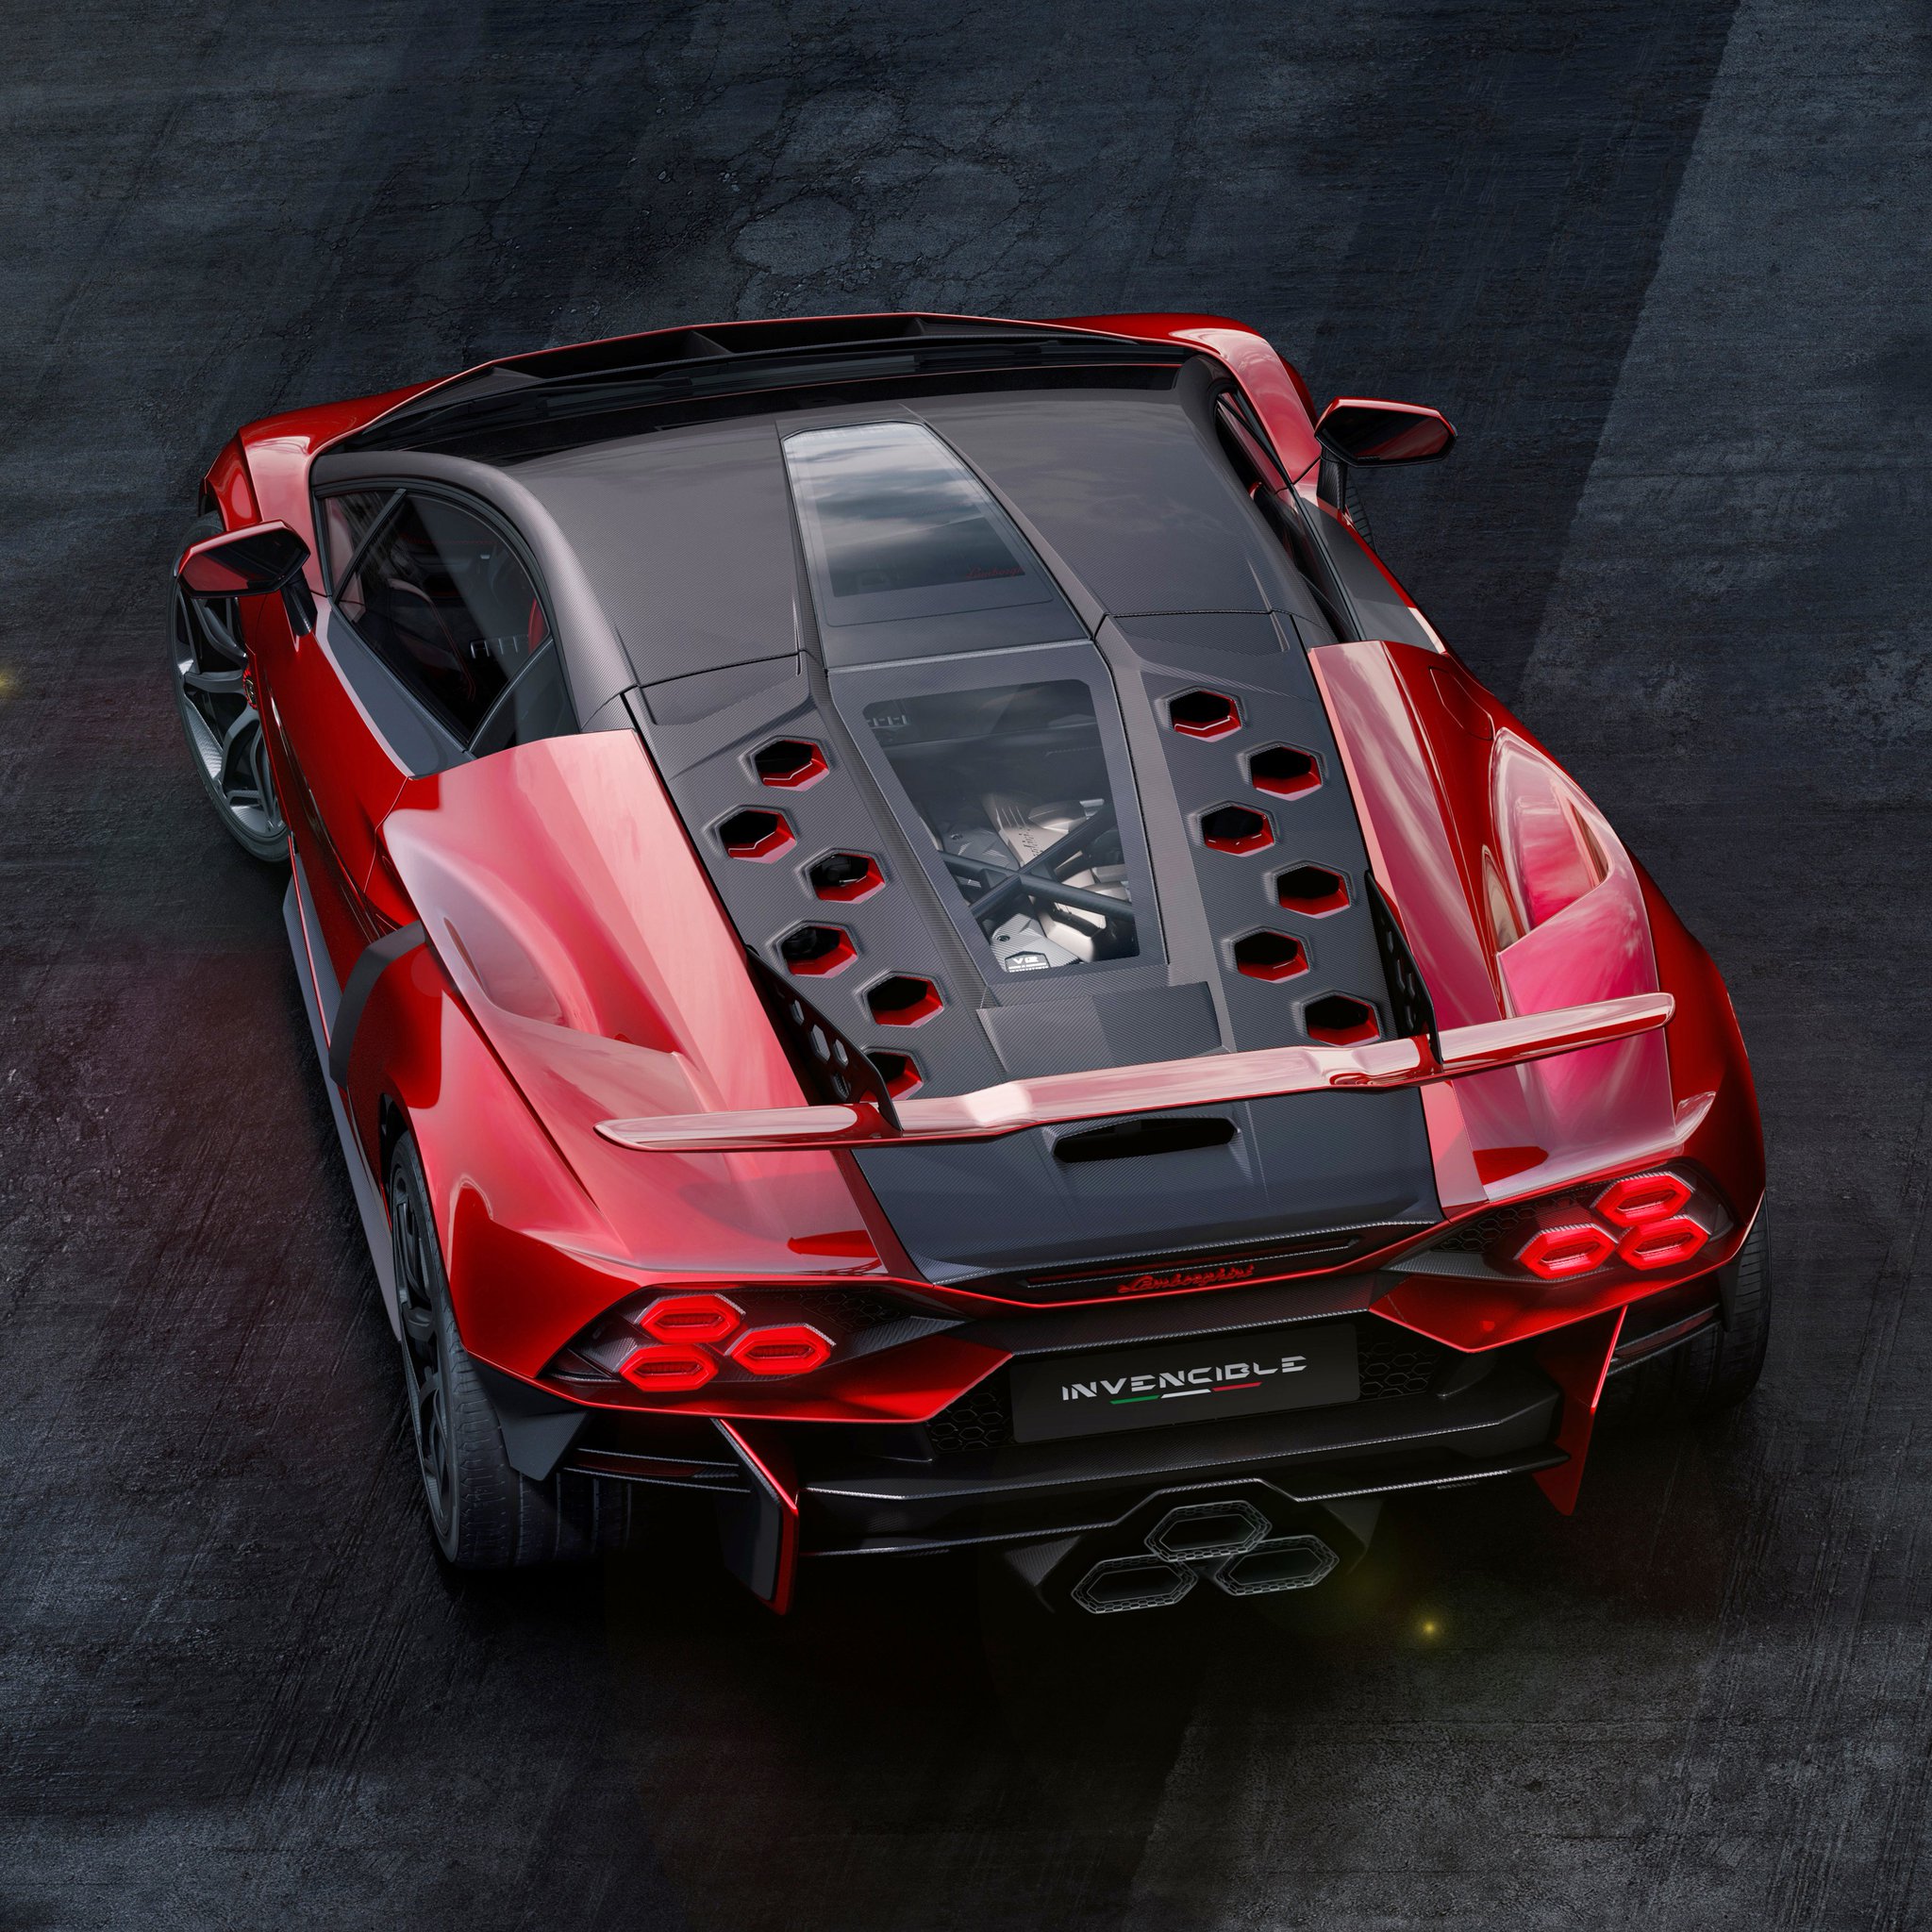 Lamborghini on X: A stunning detail of our latest V12 one-off, Invencible:  the hexagon, harmoniously integrated into its iconic bodywork. An almost  mystic vision, ready to speed on its @Pirelli tyres.​ #Lamborghini #